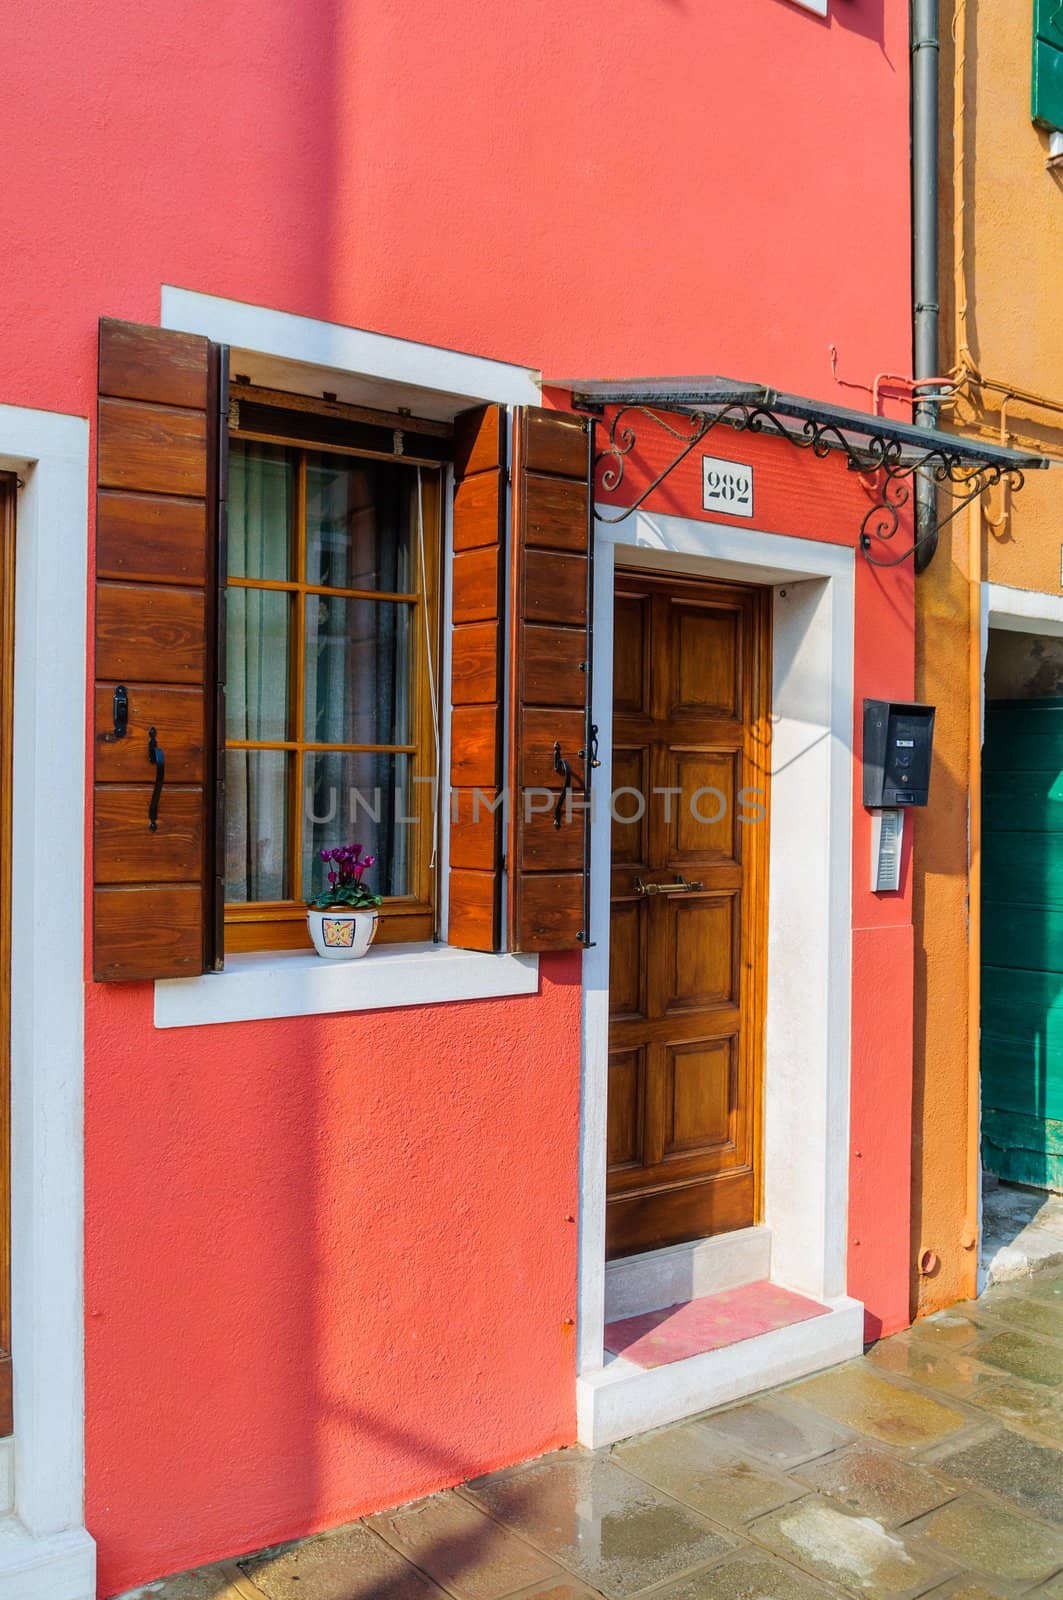 Door and windows colorful houses of Burano, Venice, Italy